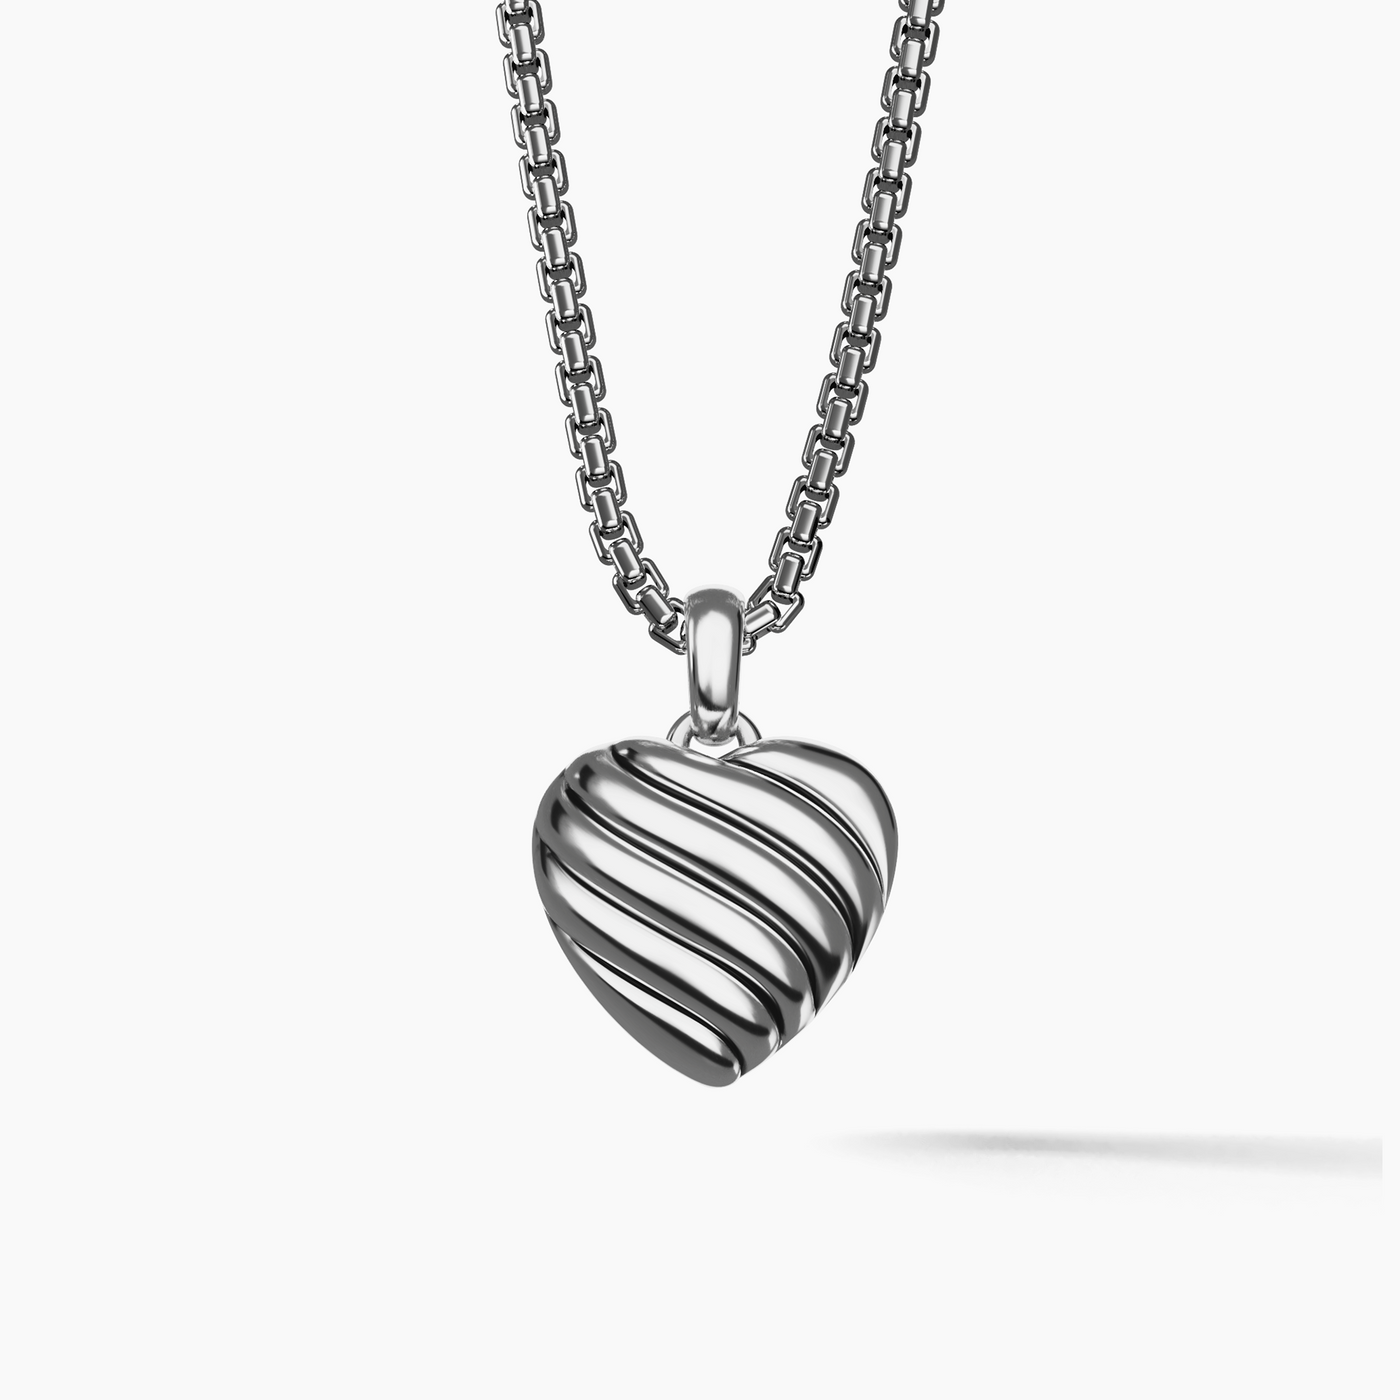 23X18MM SCULPTED CABLE HEART LOCKET ENHNCR SIL